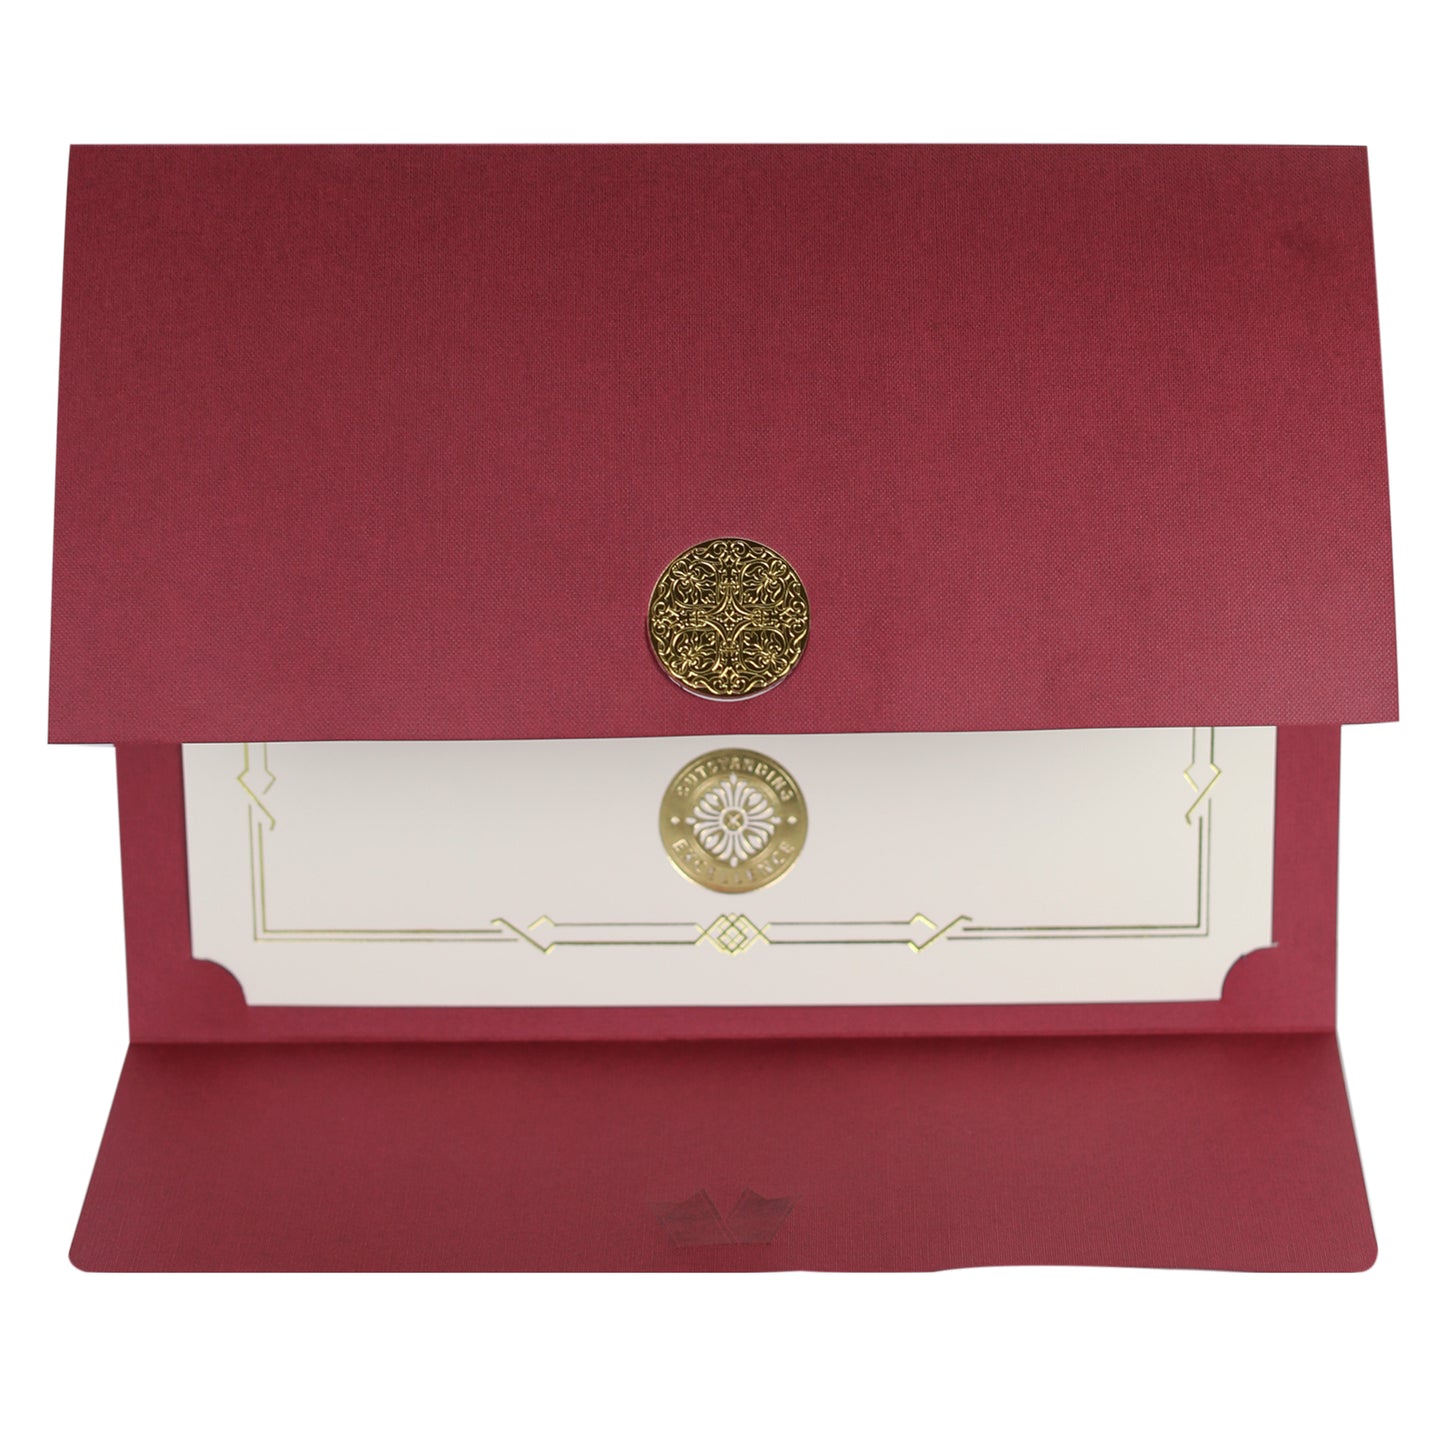 St. James® Certificate Holders/Document Covers/Diploma Holders, Burgundy, Gold Award Seal with Gold Ribbon, Pack of 5, 83819